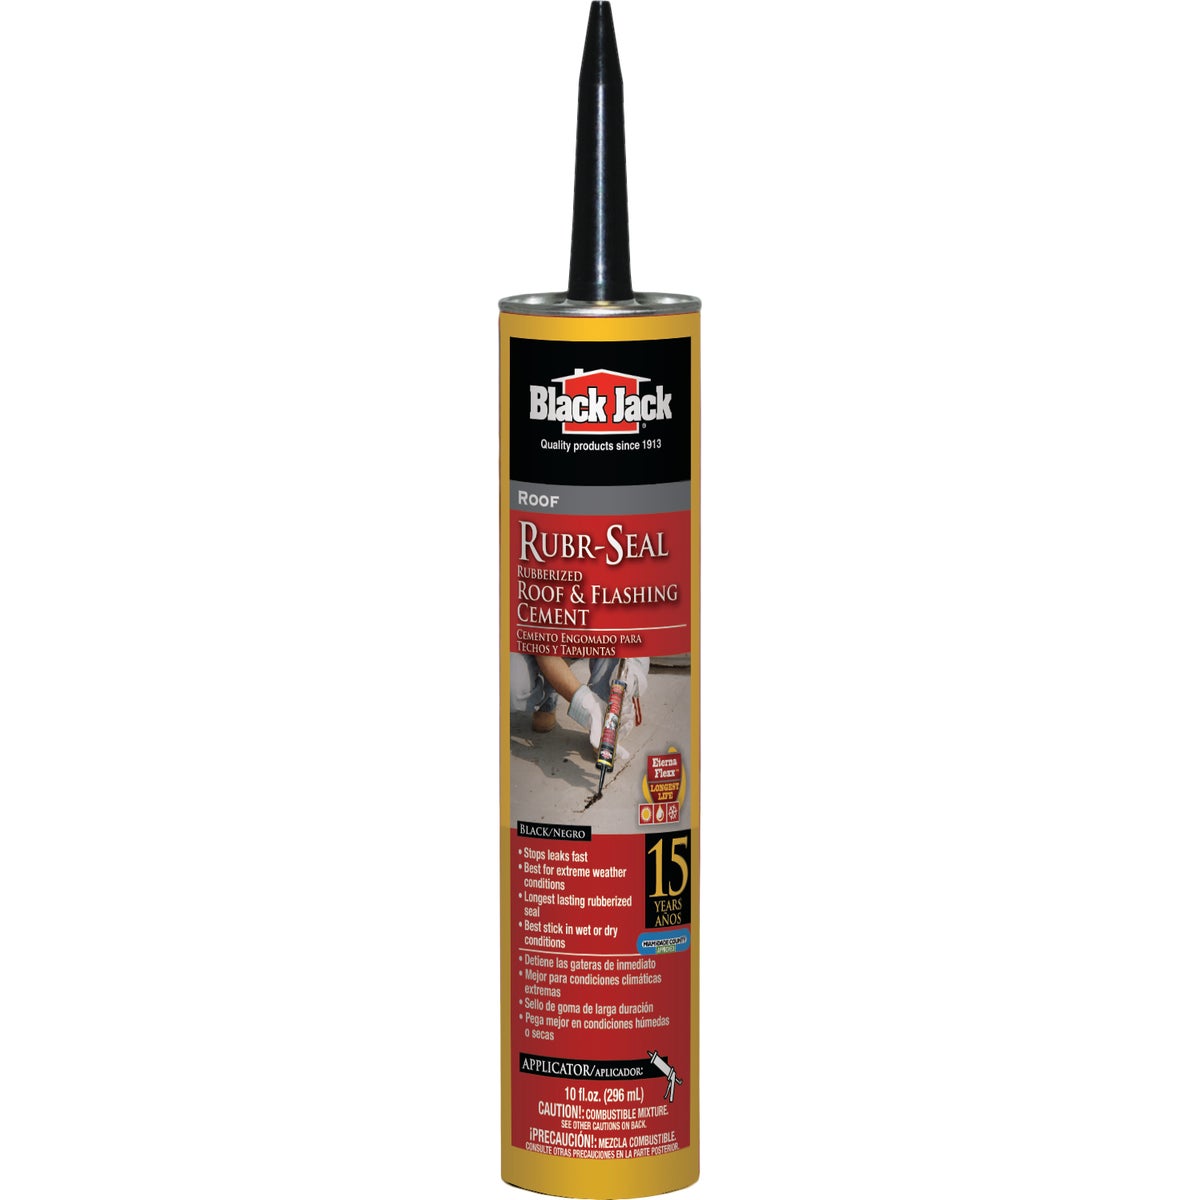 Black Jack Rubr-Seal 10 Oz. 15 Year Roof and Flashing Cement